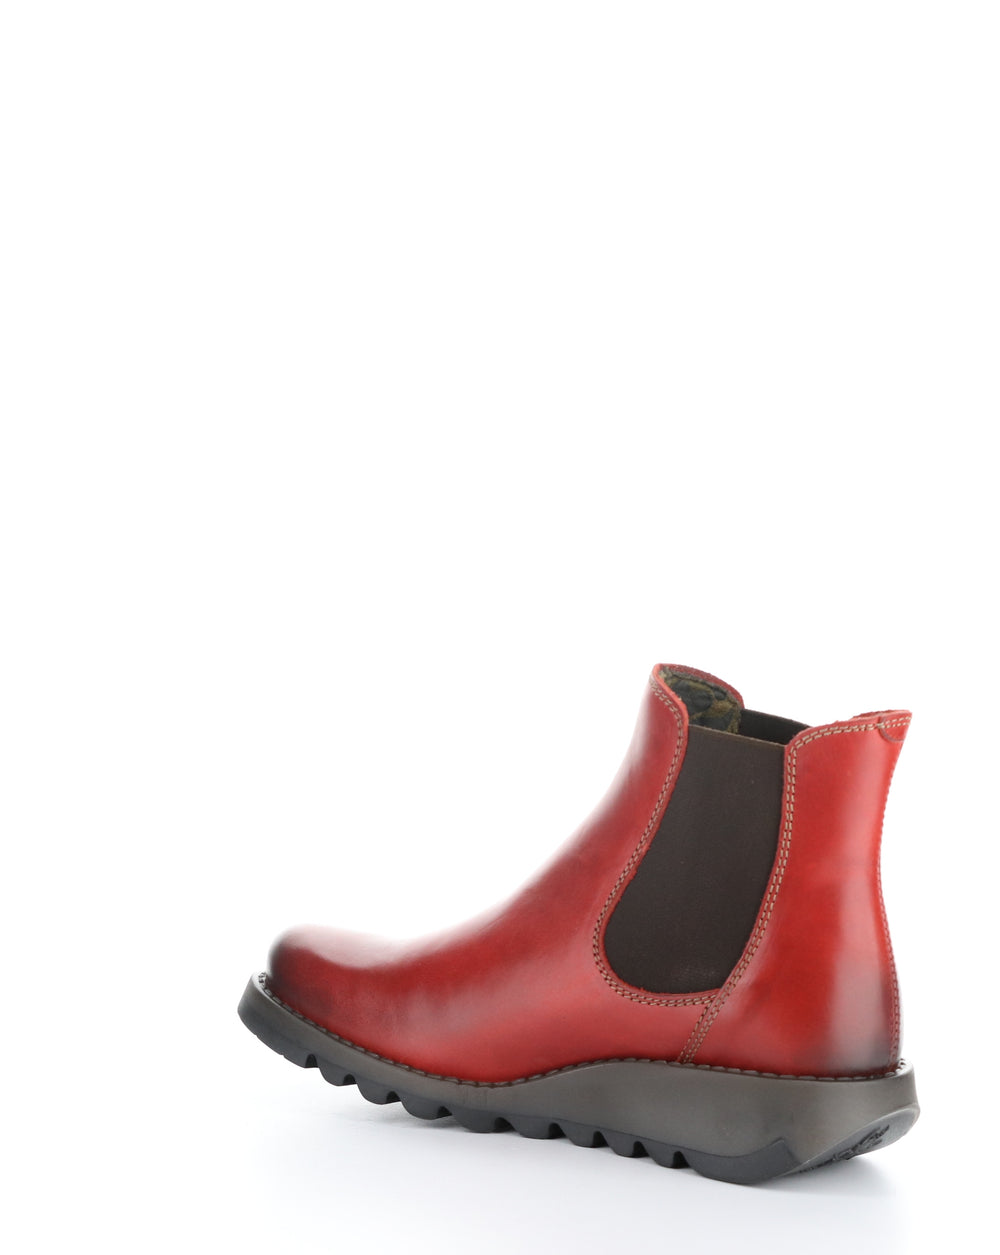 SALV 004 RED Elasticated Boots